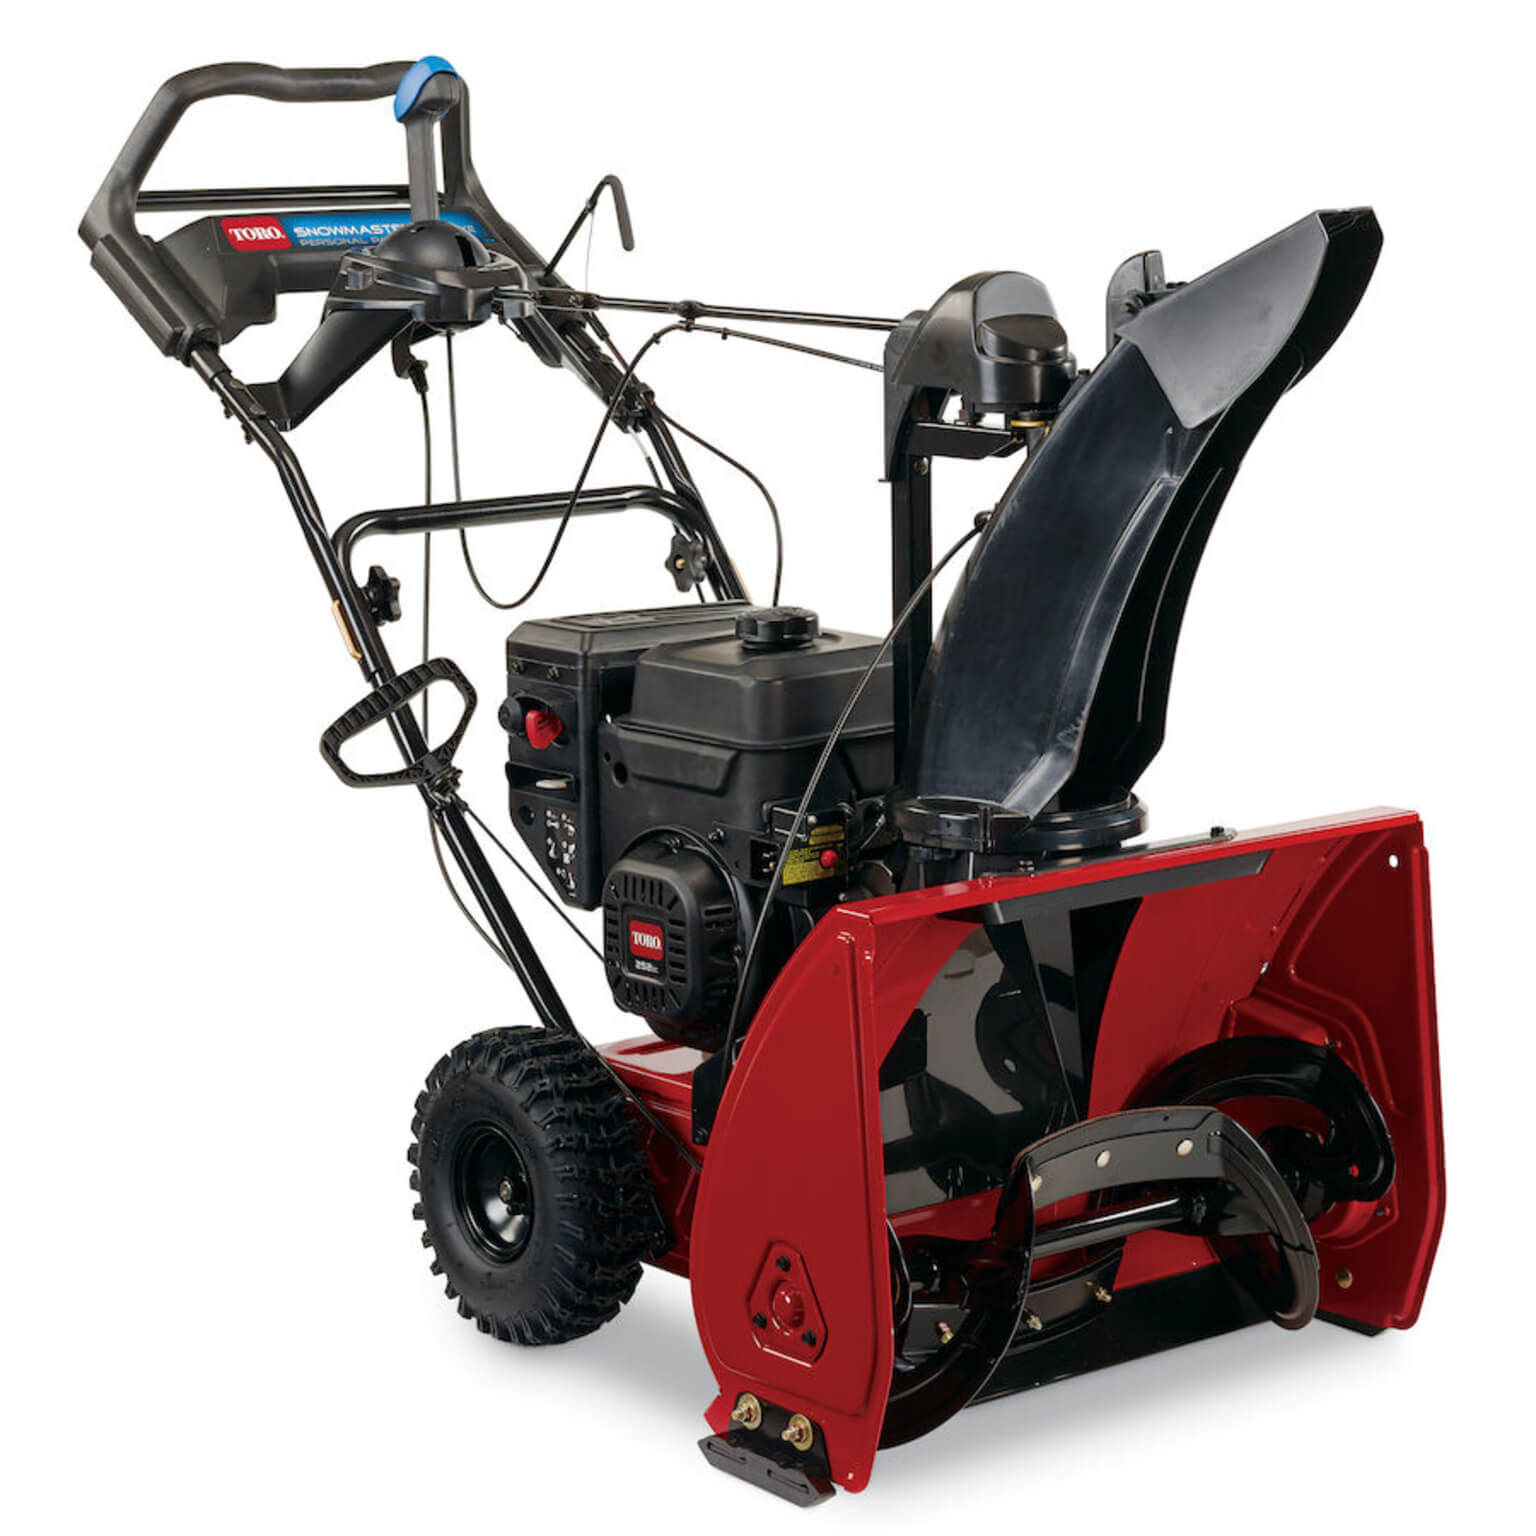 SnowMaster 824 QXE Snow Blower